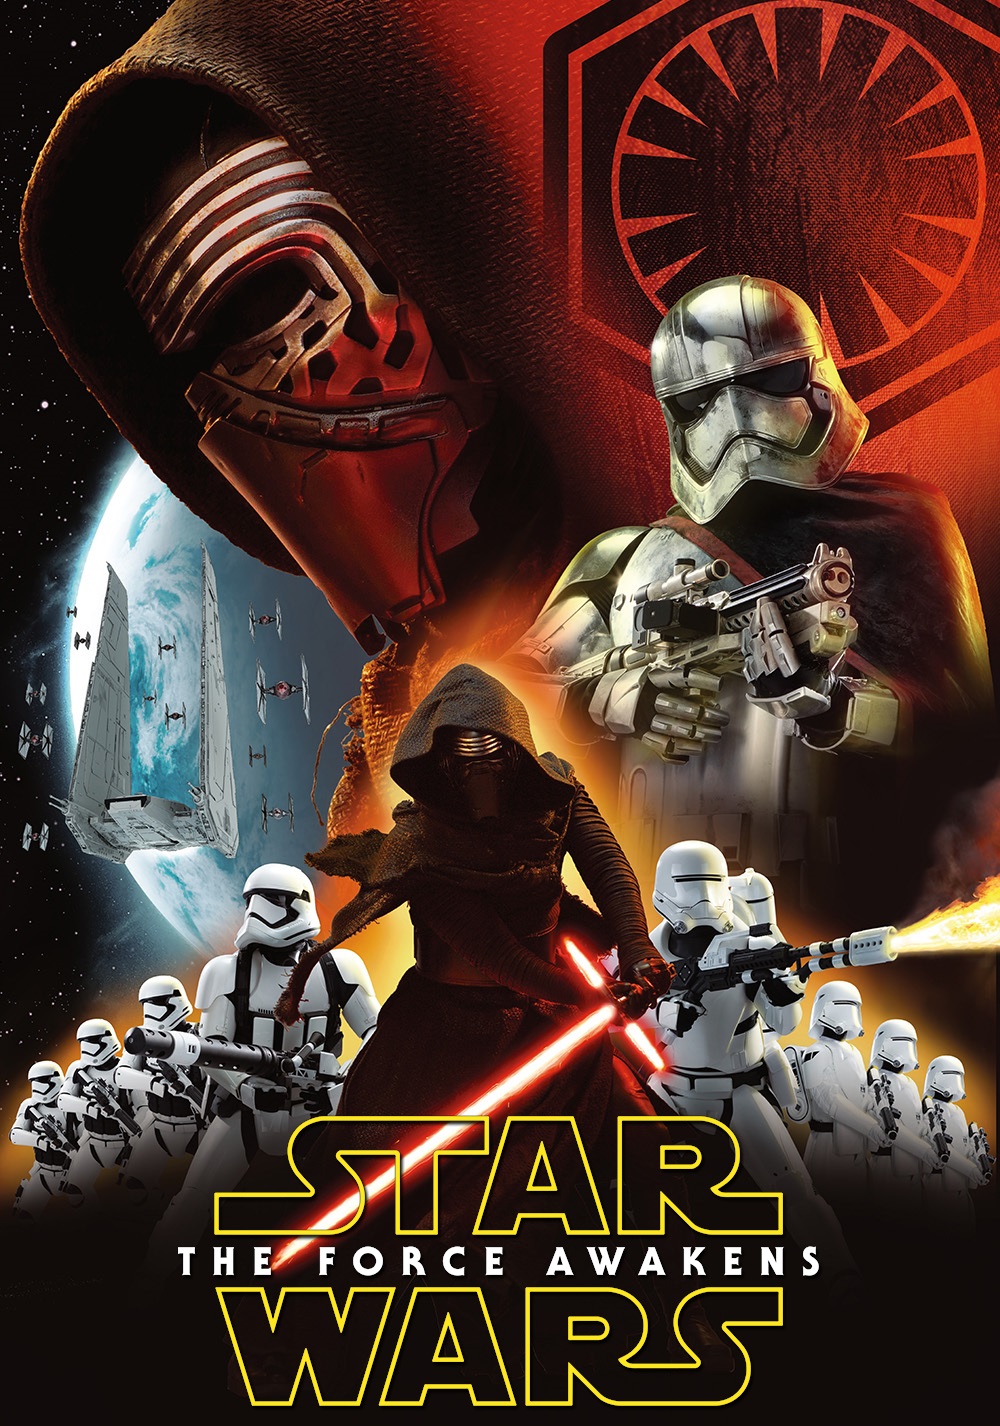 Star Wars Ep. VII: The Force Awakens download the new for android